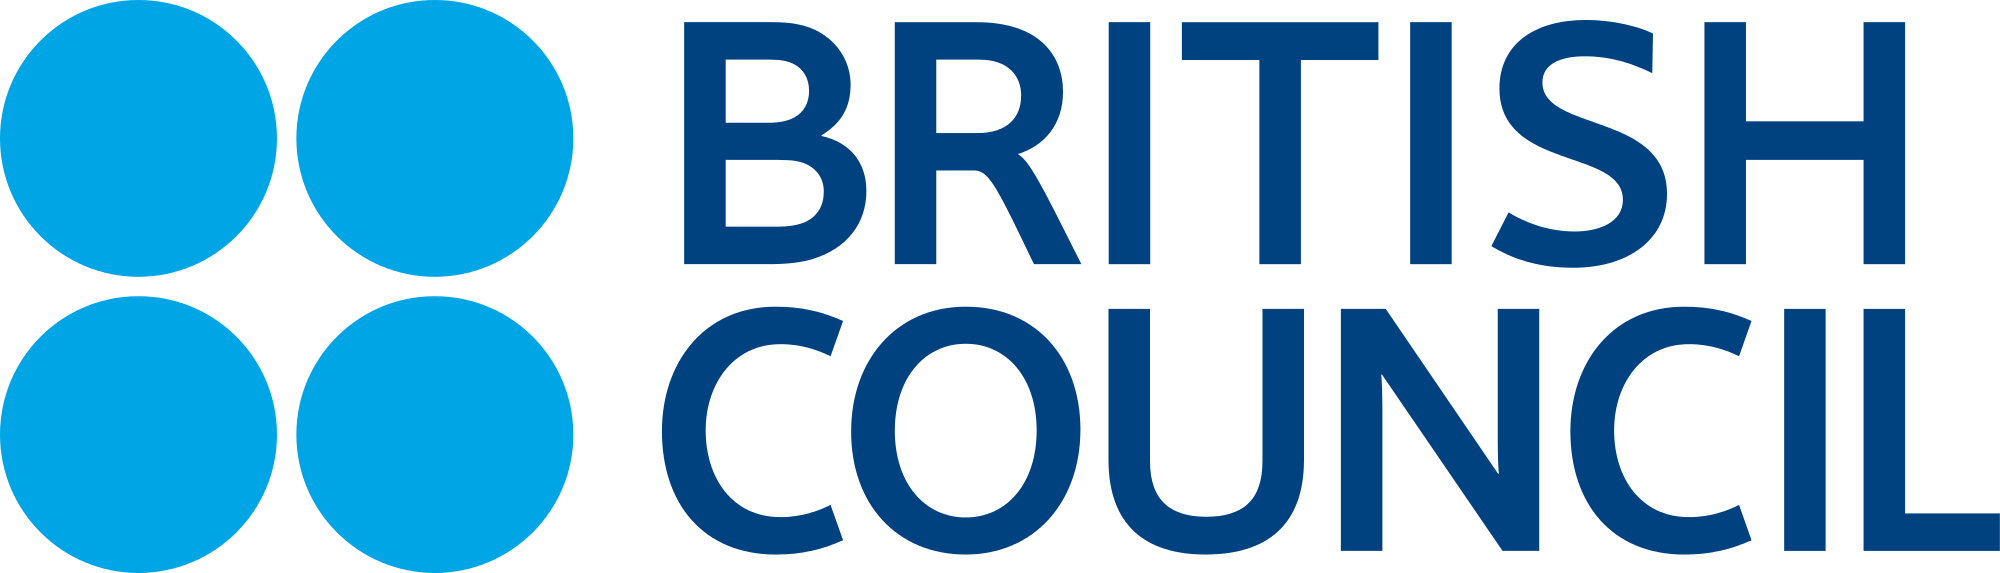 A long-standing collaborator of the British Council